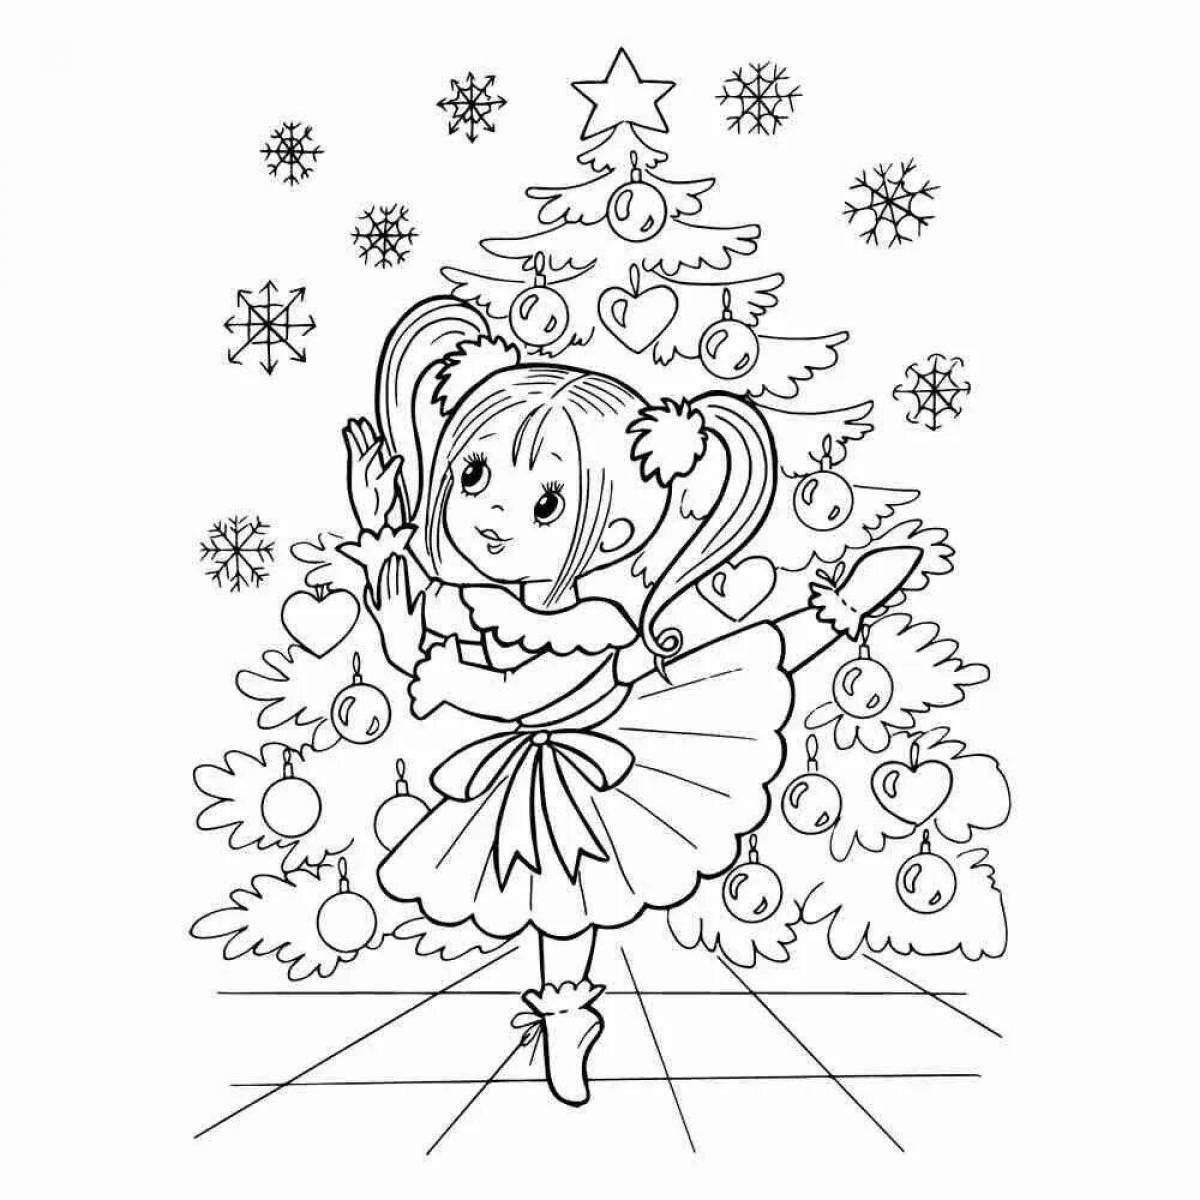 Christmas holiday coloring book for kids